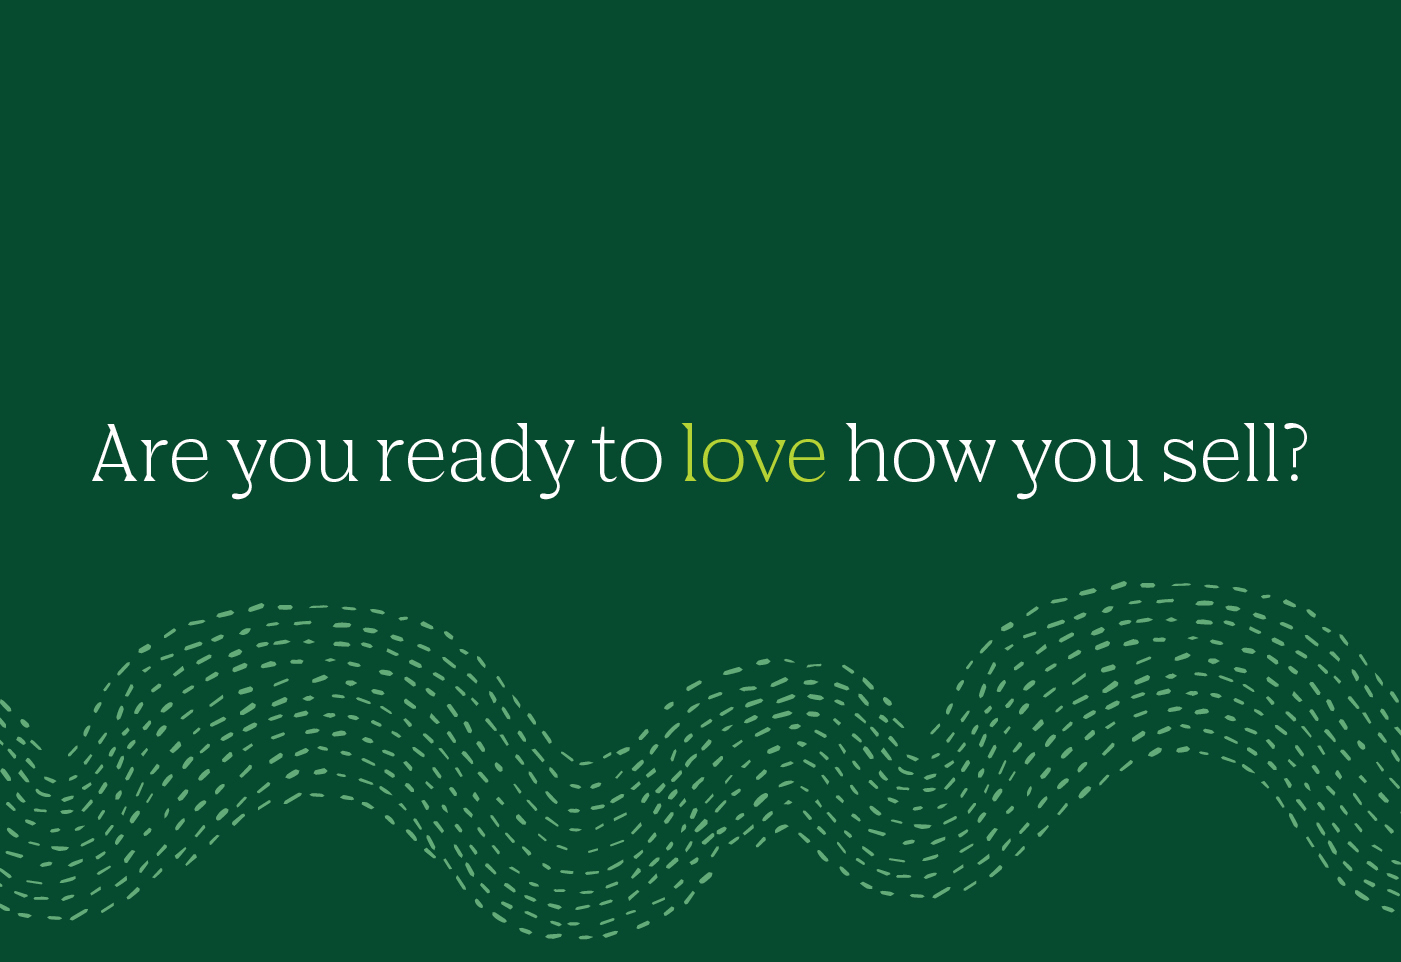 Are you ready to love how you sell?